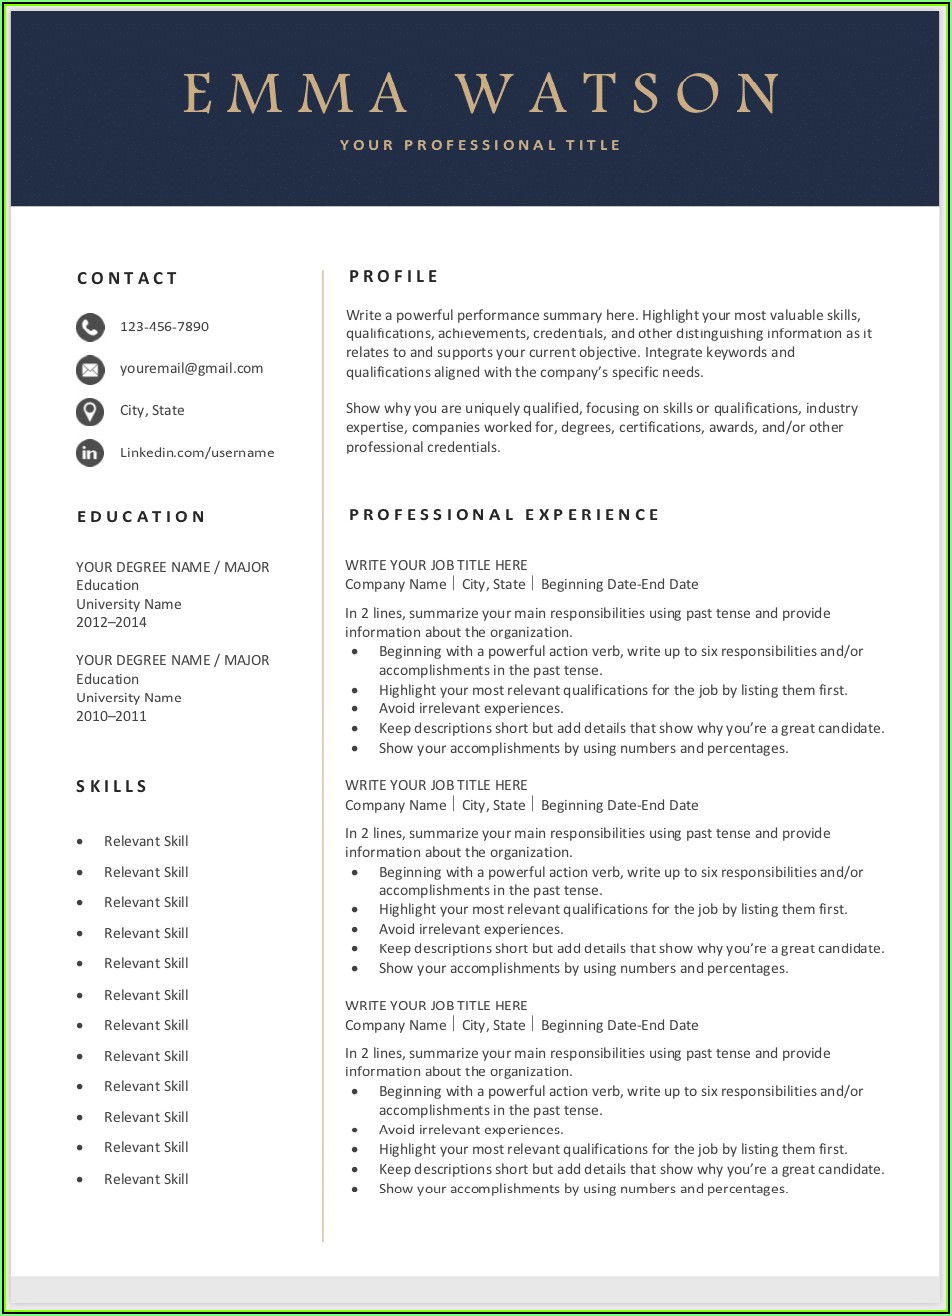 Template For Professional Resume